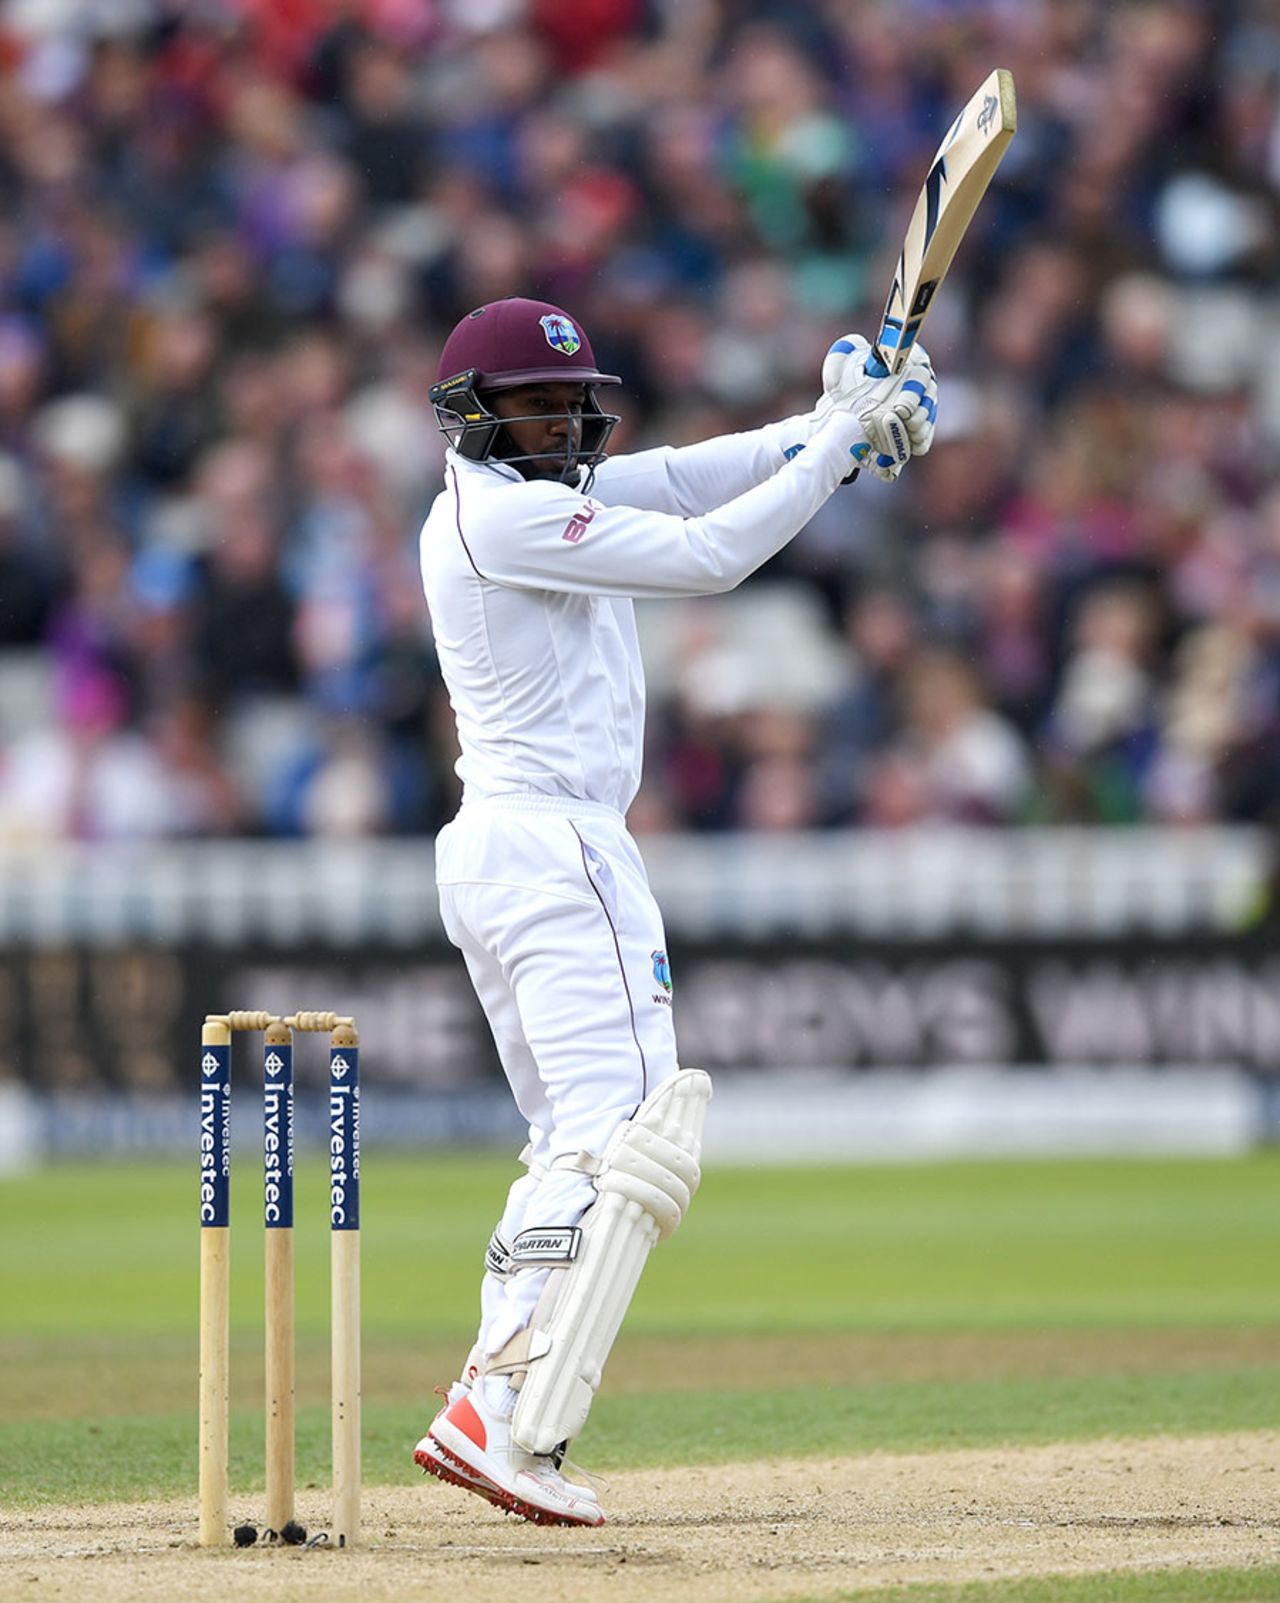 Jermaine Blackwood attacked as West Indies folded around him, England v West Indies, 1st Investec Test, Edgbaston, 3rd day, August 19, 2017